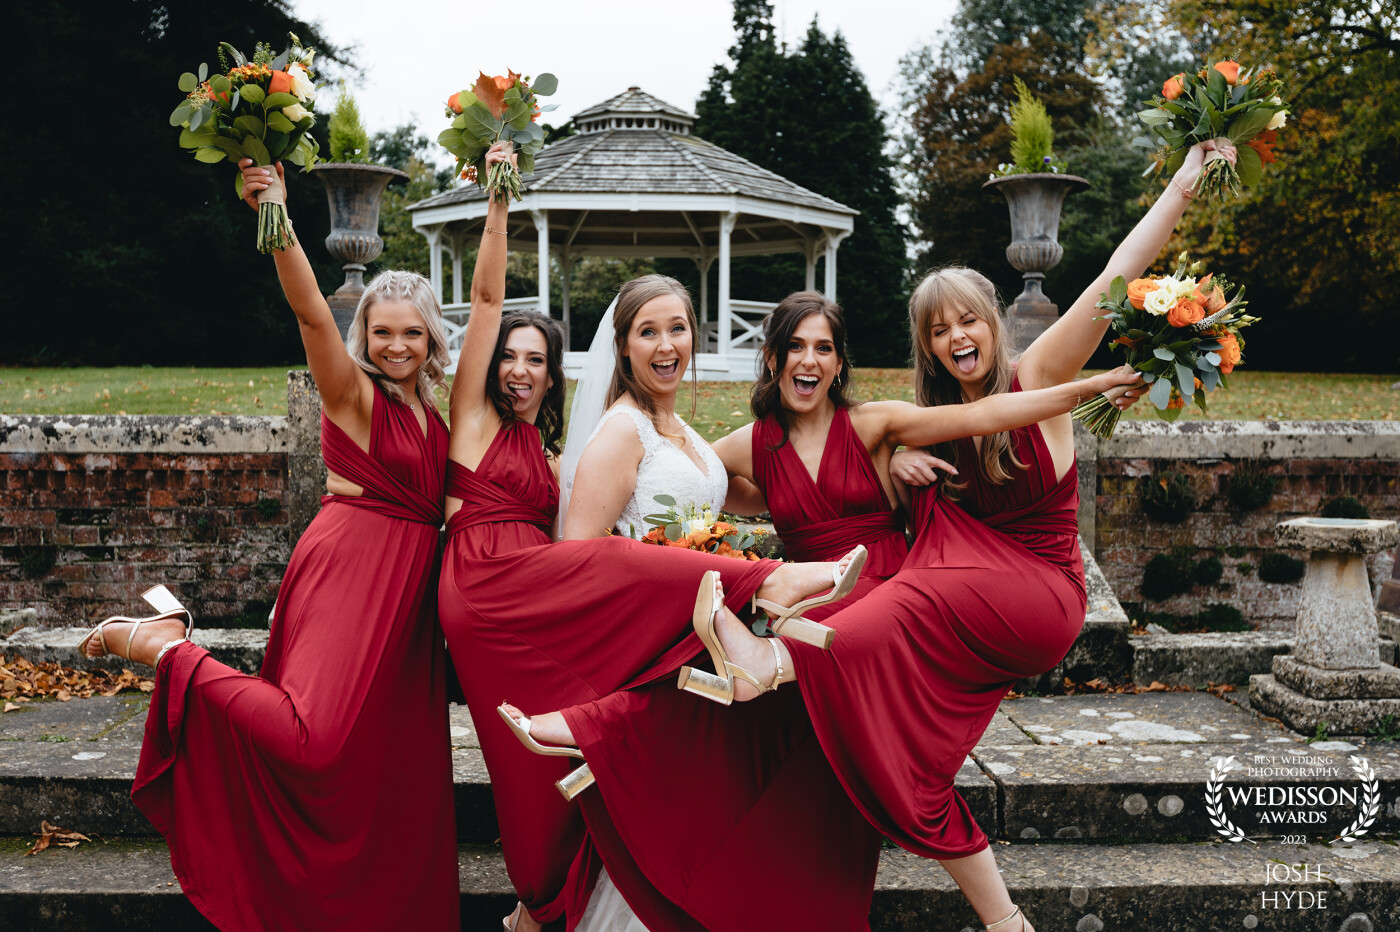 Get yourself a crazy bunch of bridesmaids like this! Makes for some fun and interesting group photos that you'll actually cherish.